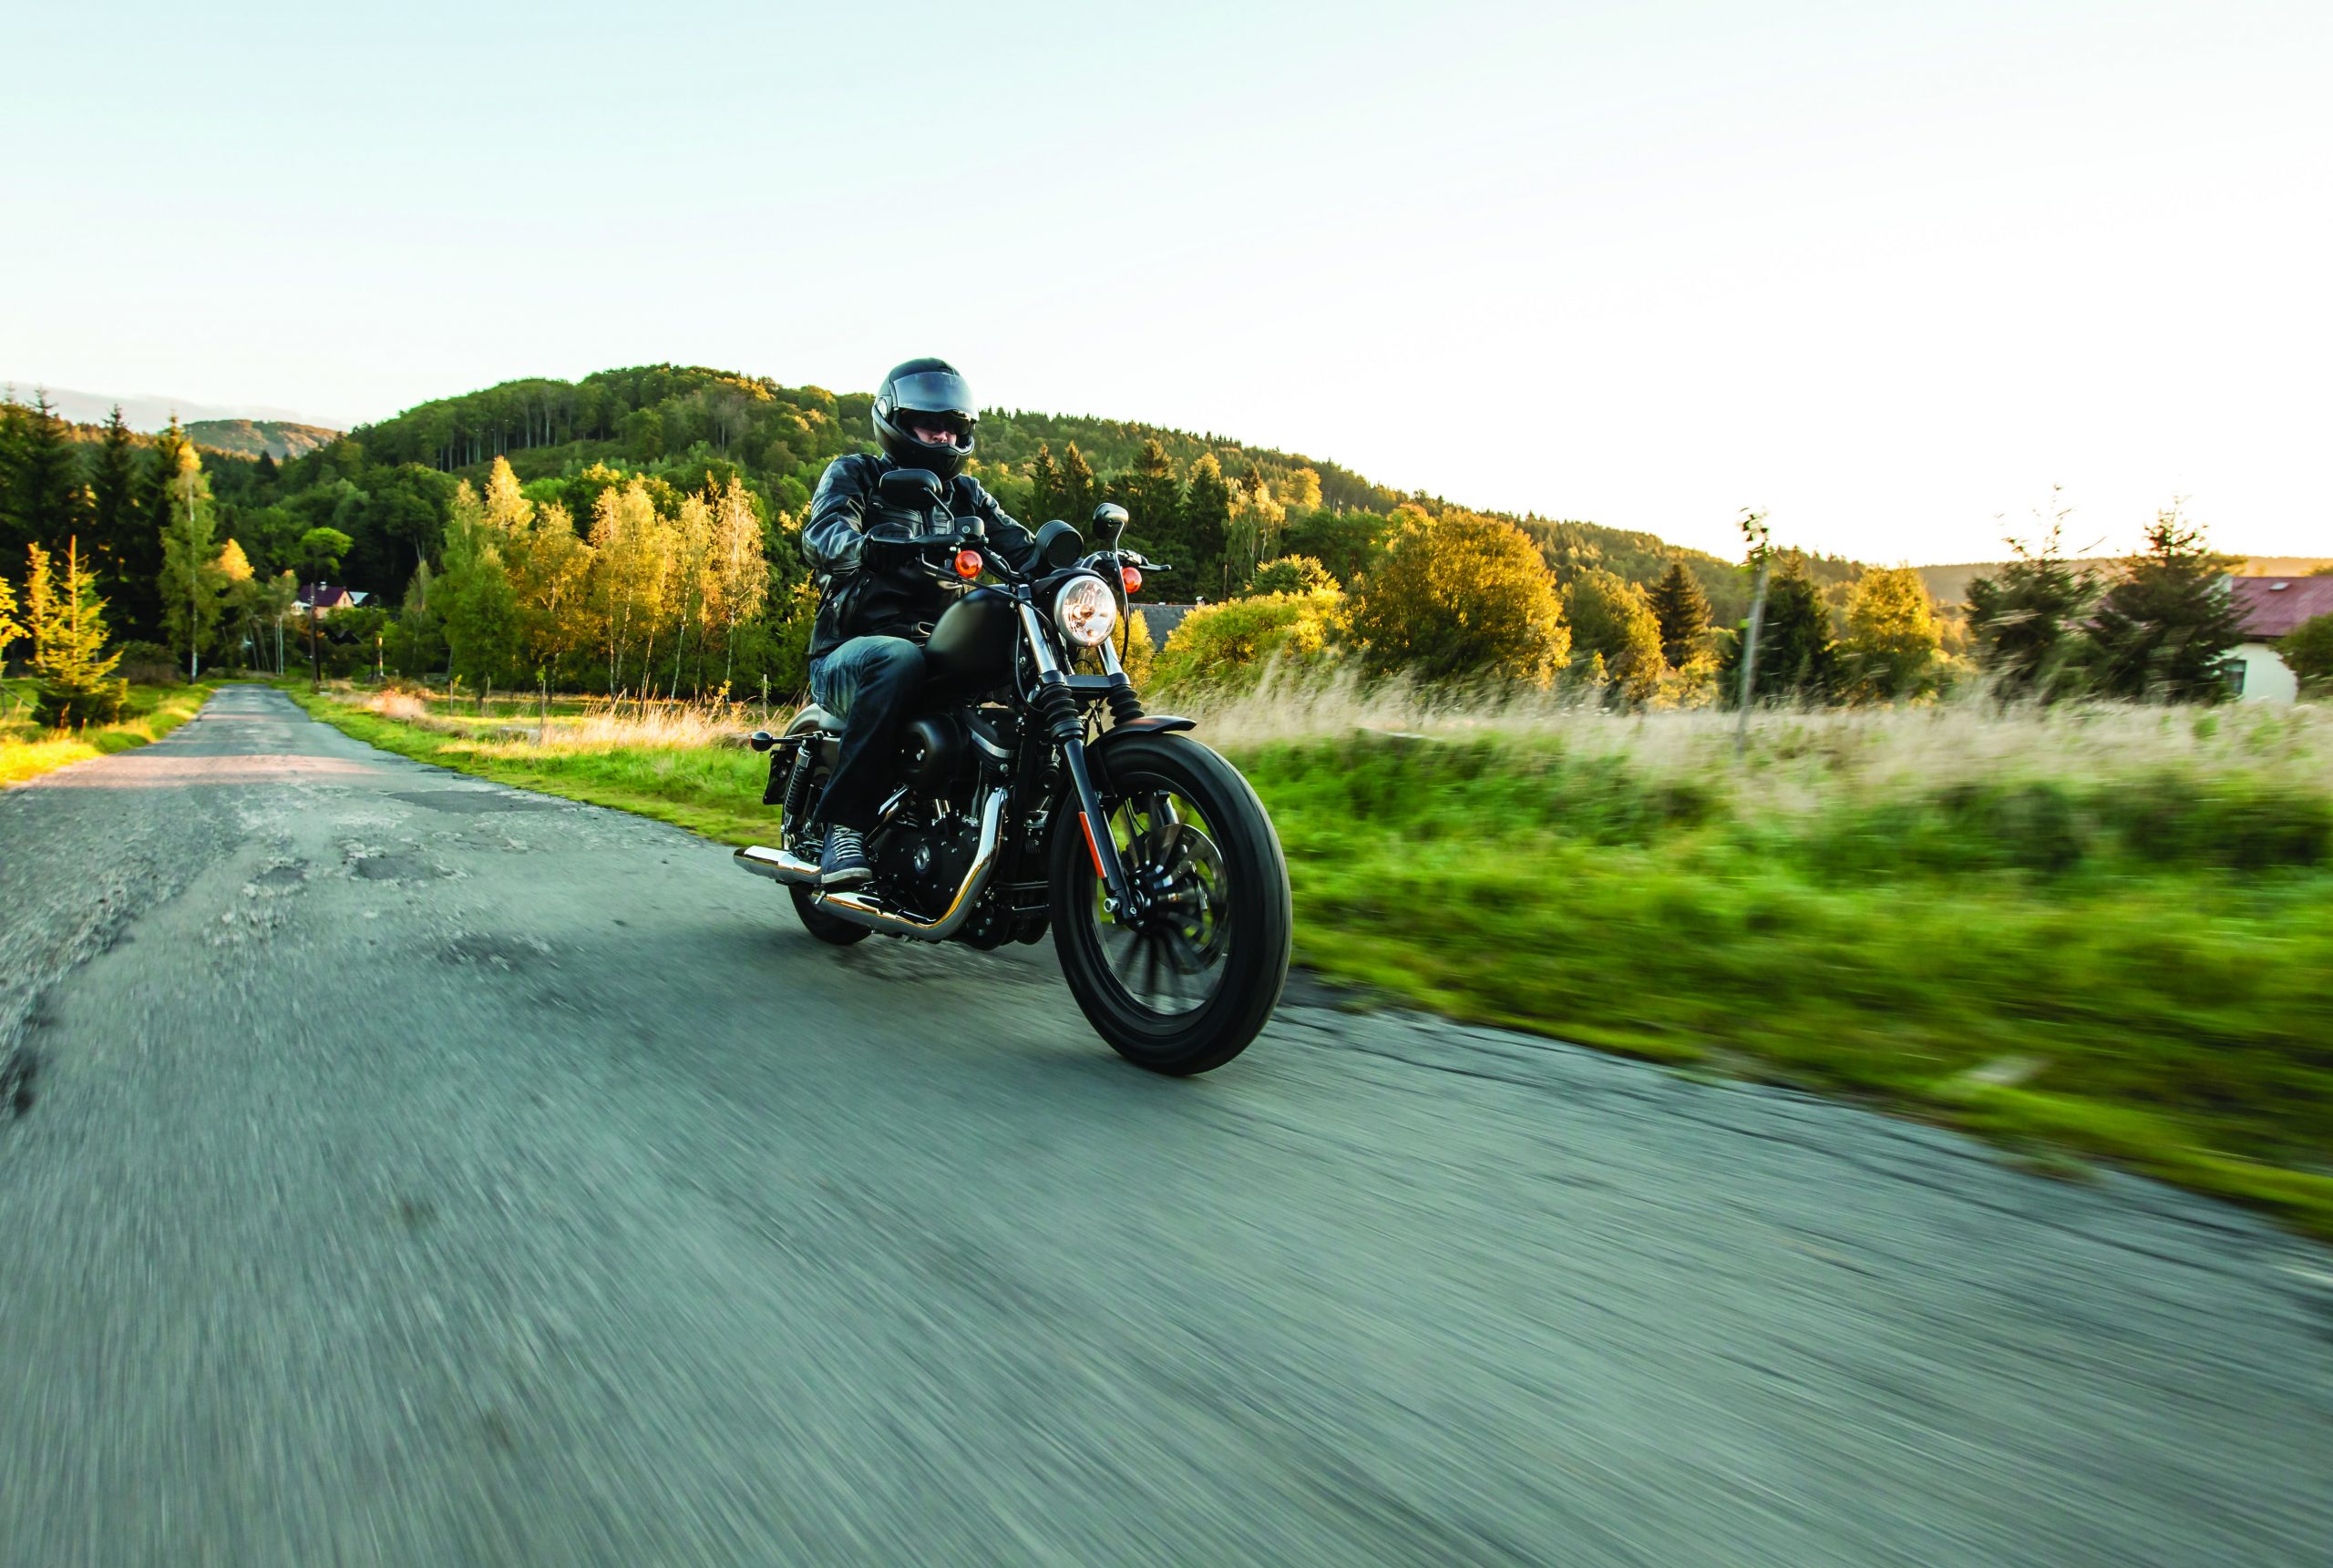 5 Tips to Make Your Motorcycle Adventure Safer